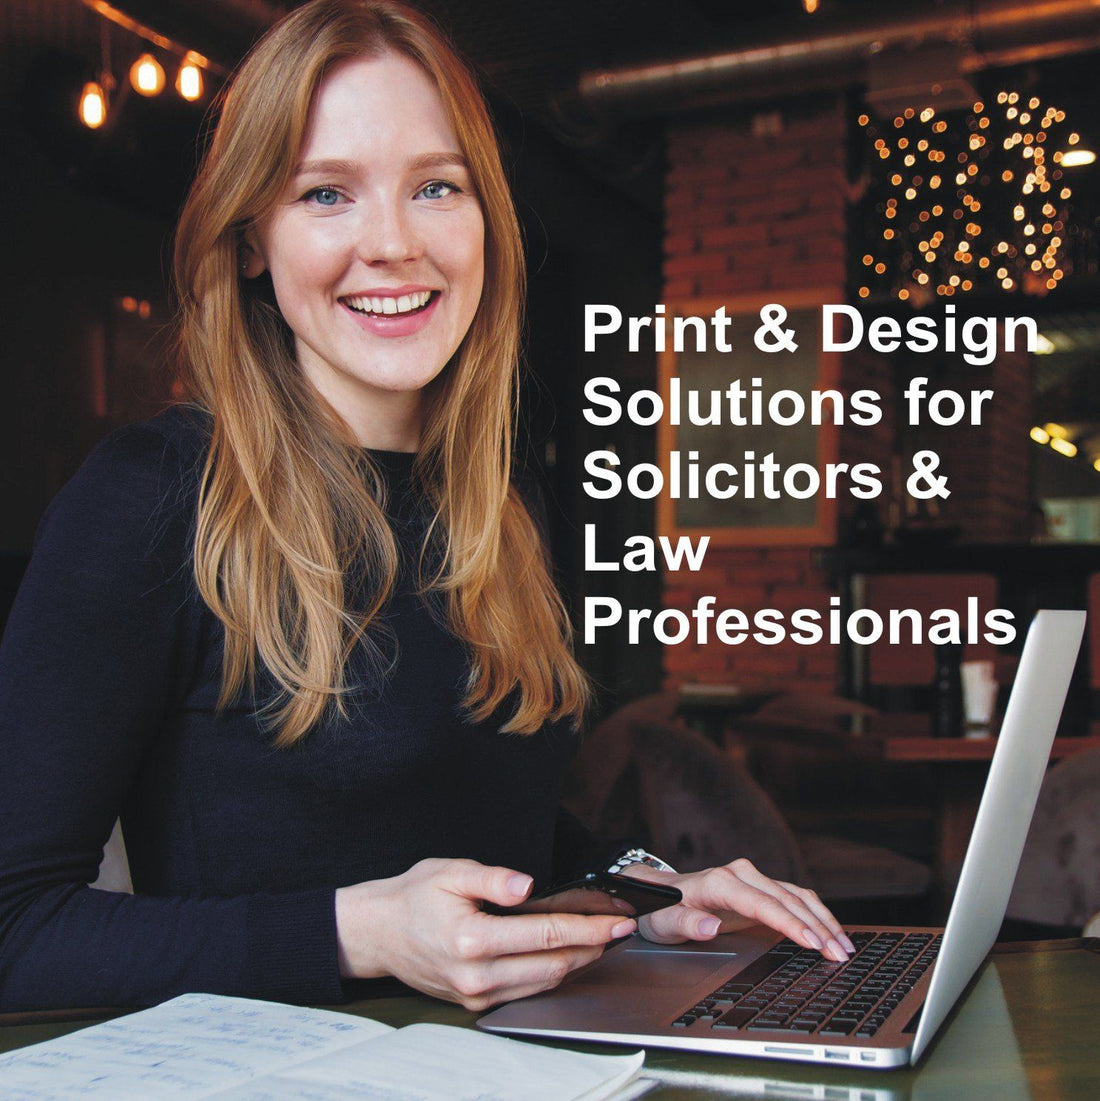 Solicitors & Law Professionals - Specialist Print Solutions